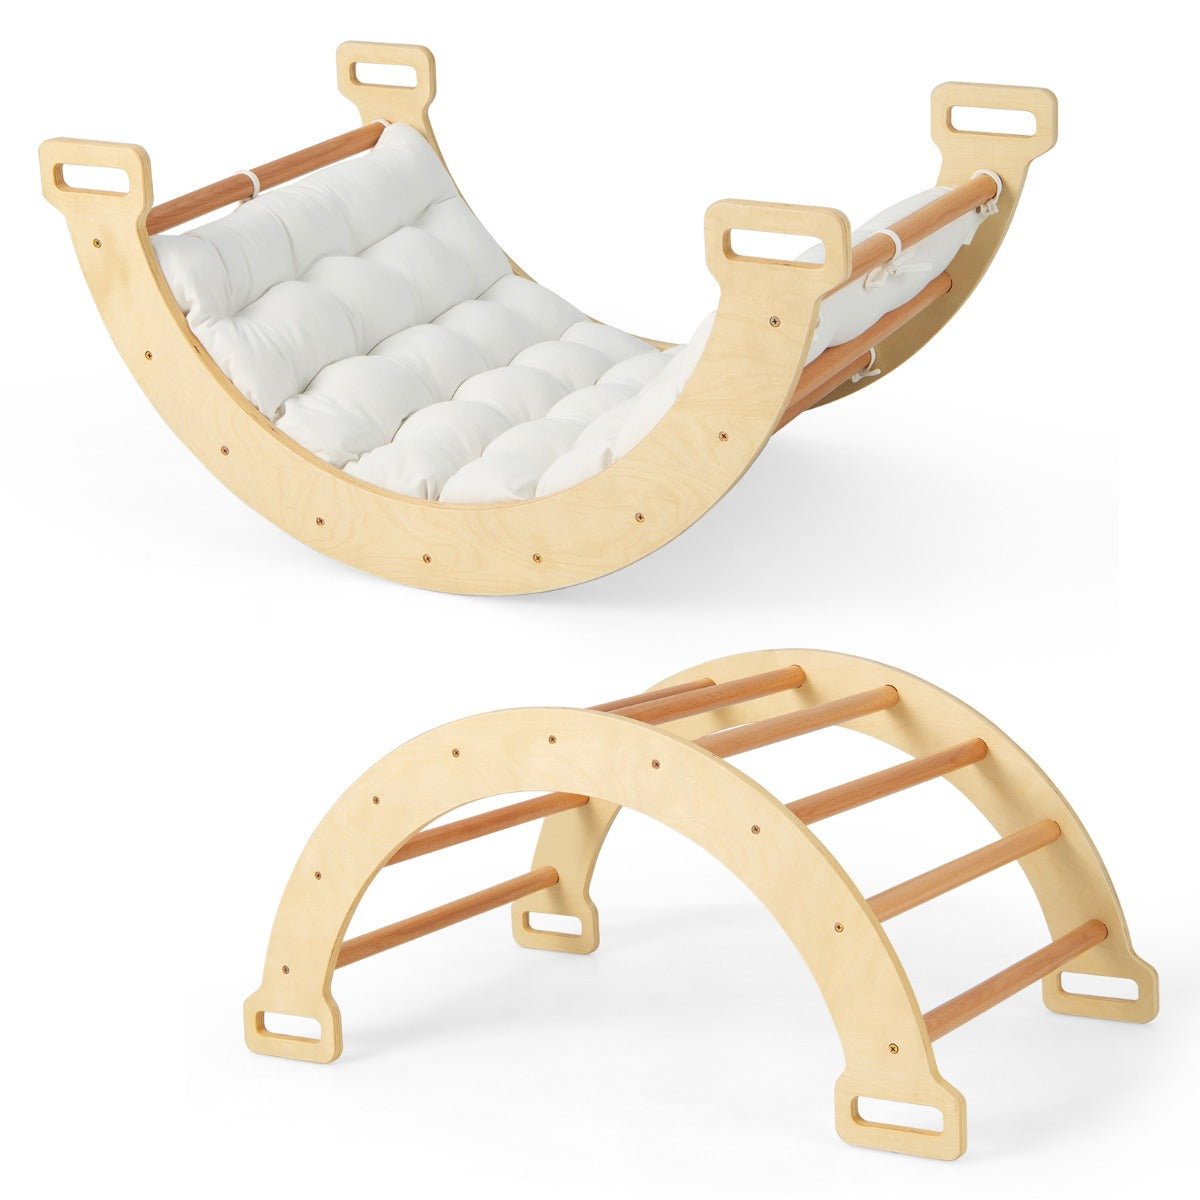 3-in-1 Double-Sided Arch Rocker - Creative Play with Soft Cushion